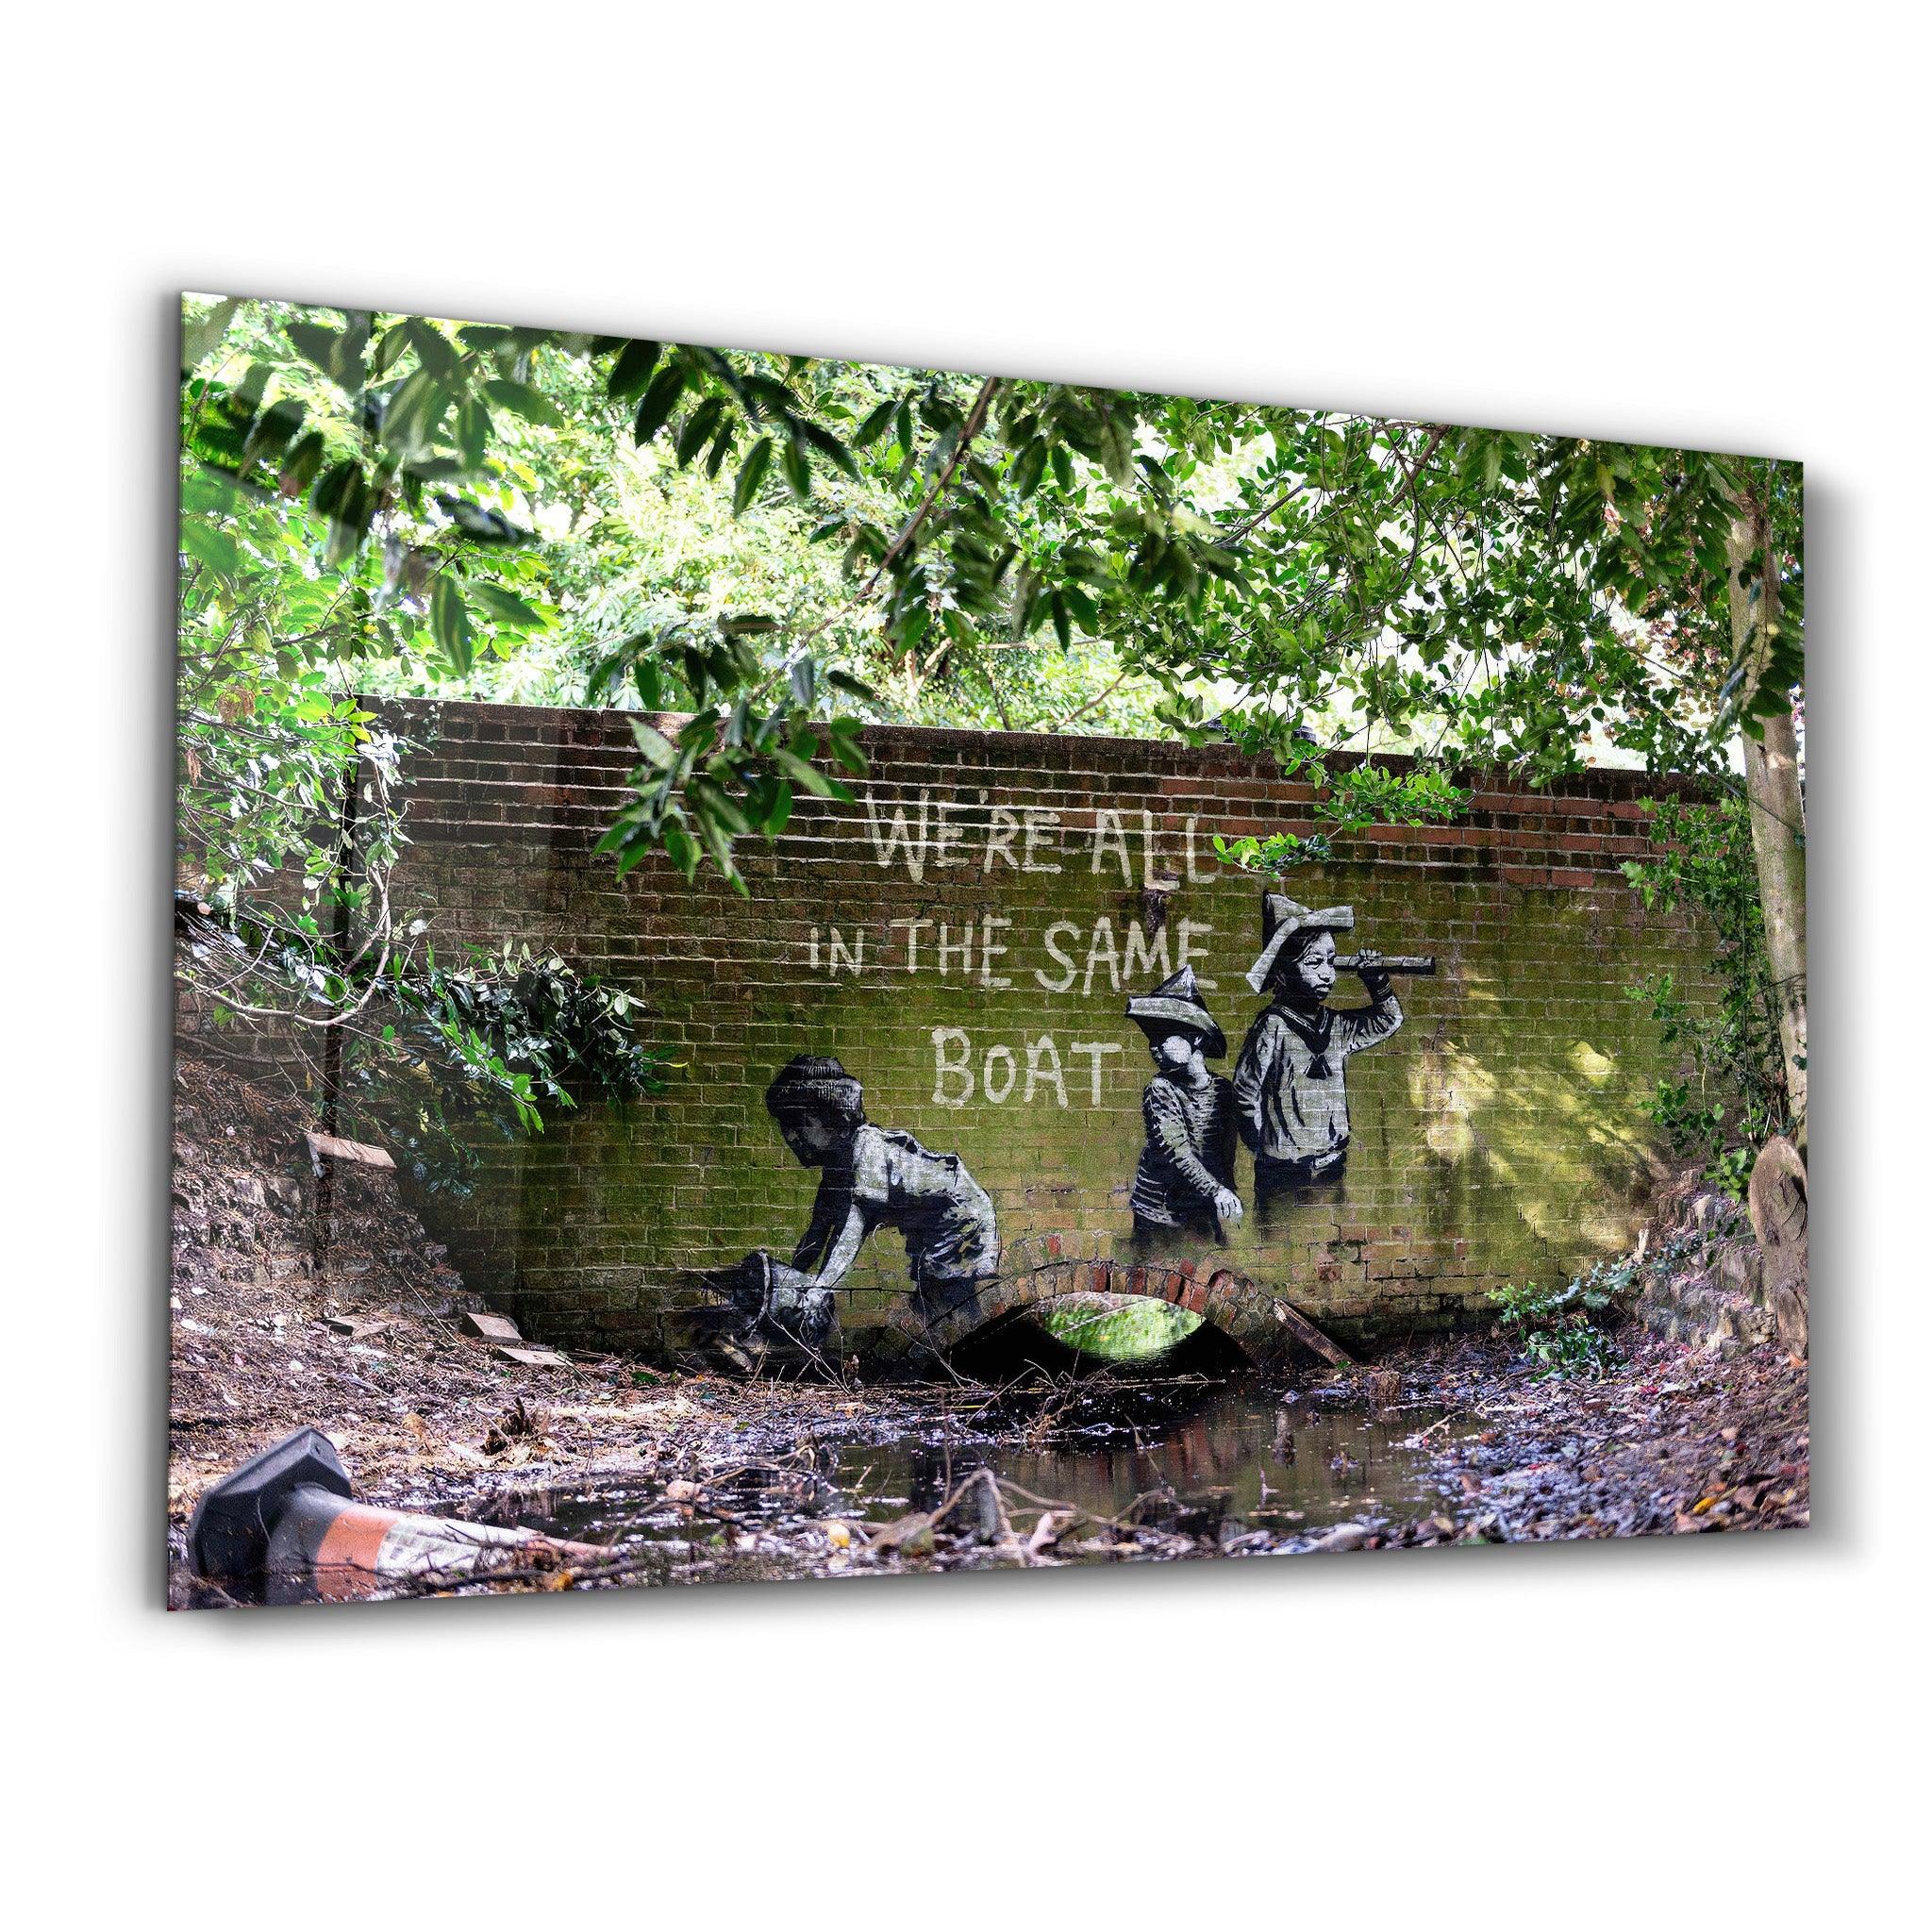 Banksy - We are all in the same boat | Glass Wall Art - ArtDesigna Glass Printing Wall Art